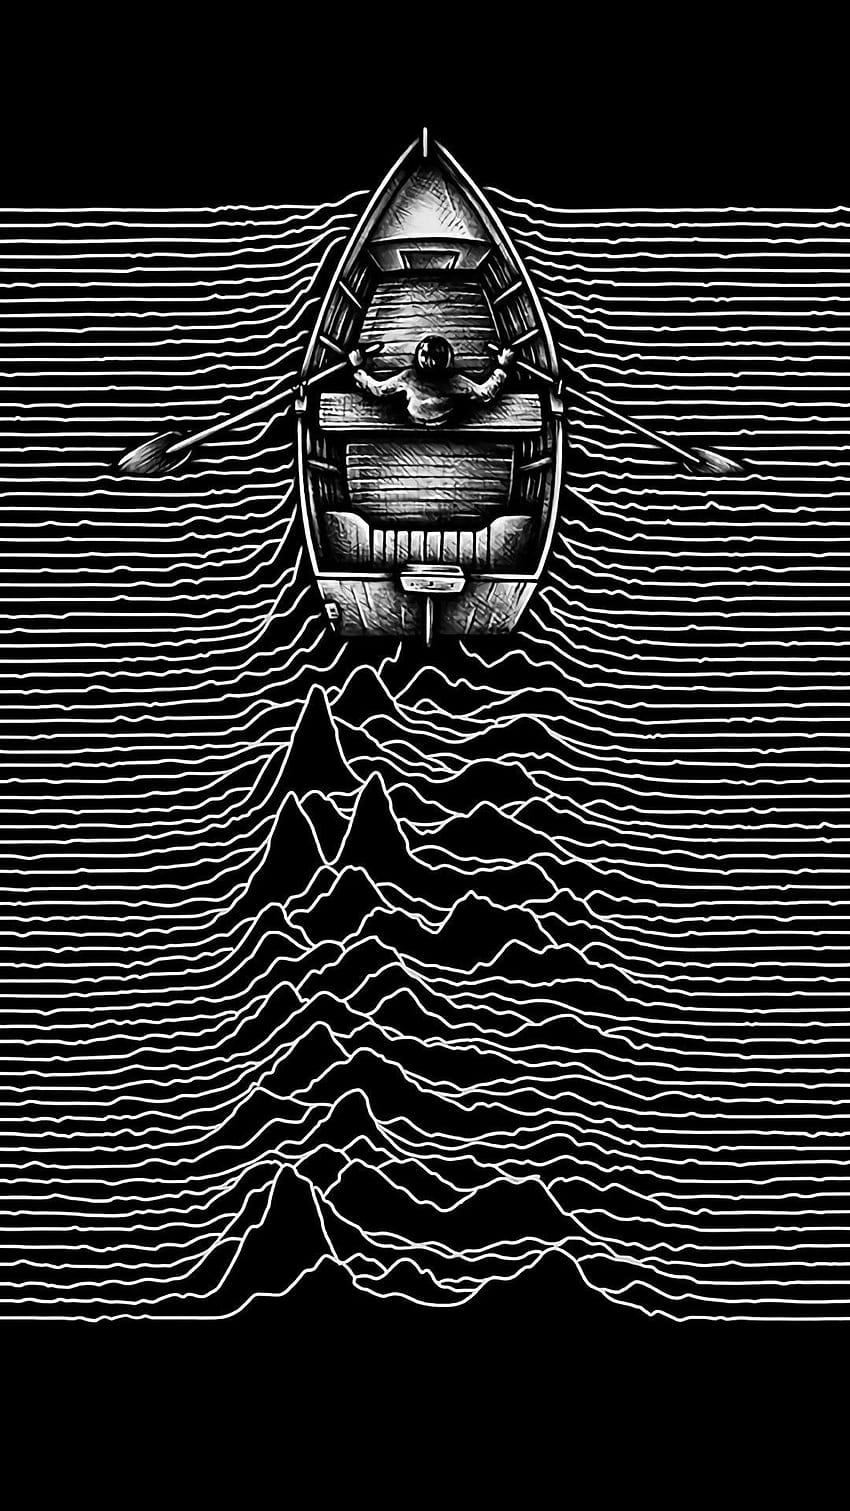 Joy Division Unknown Pleasures posted by Ryan Walker, ジョイ・ディビジョン iphone HD電話の壁紙